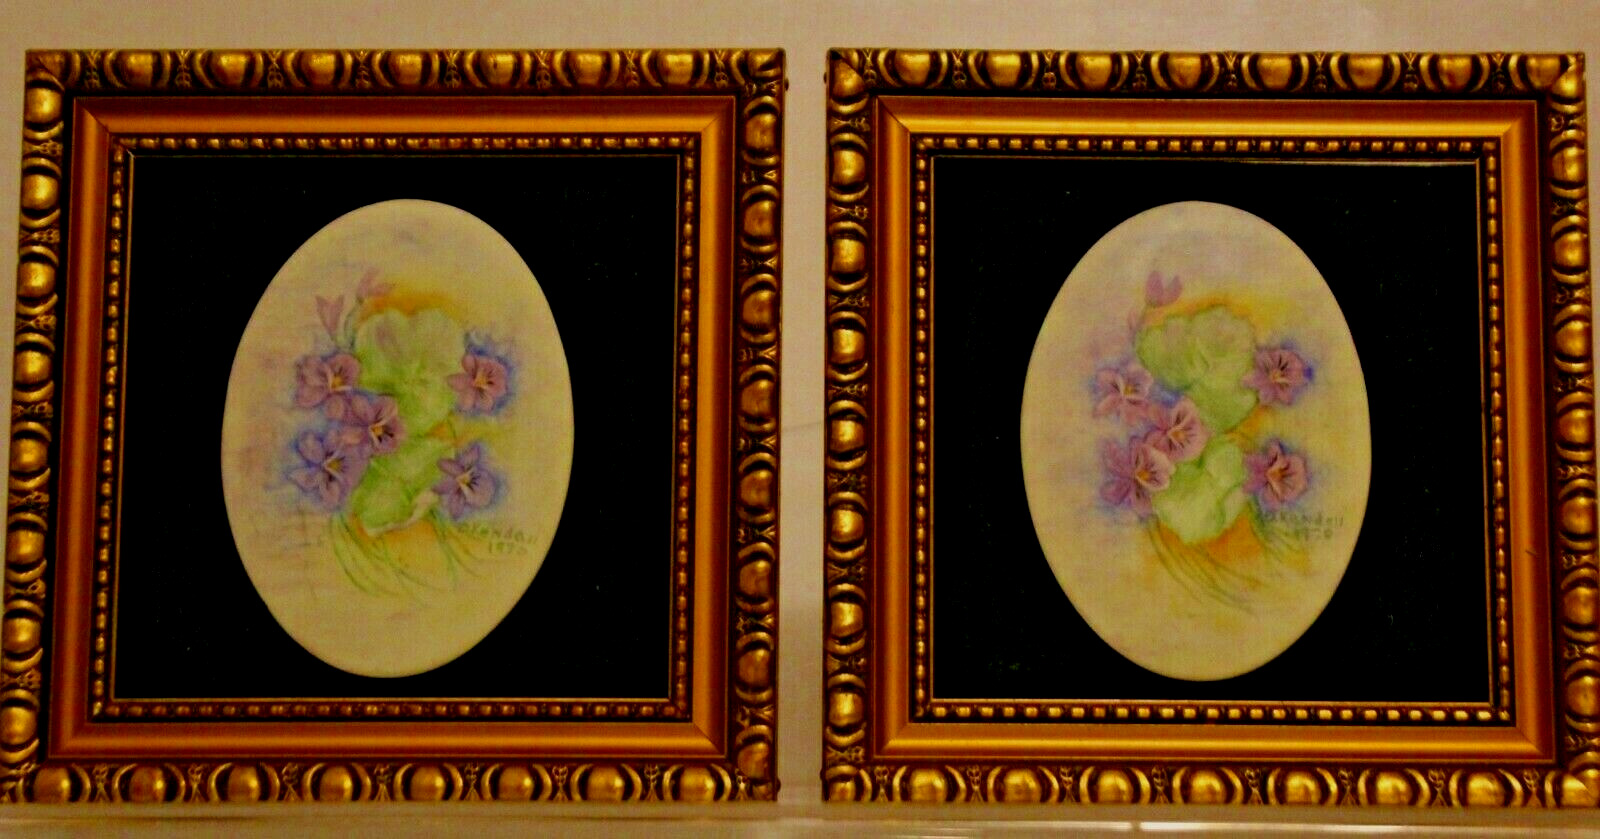 LOVELY PAIR MINIATURE FLOWERS PAINTING on PORCELAIN in OVAL Framed By D. Kendall